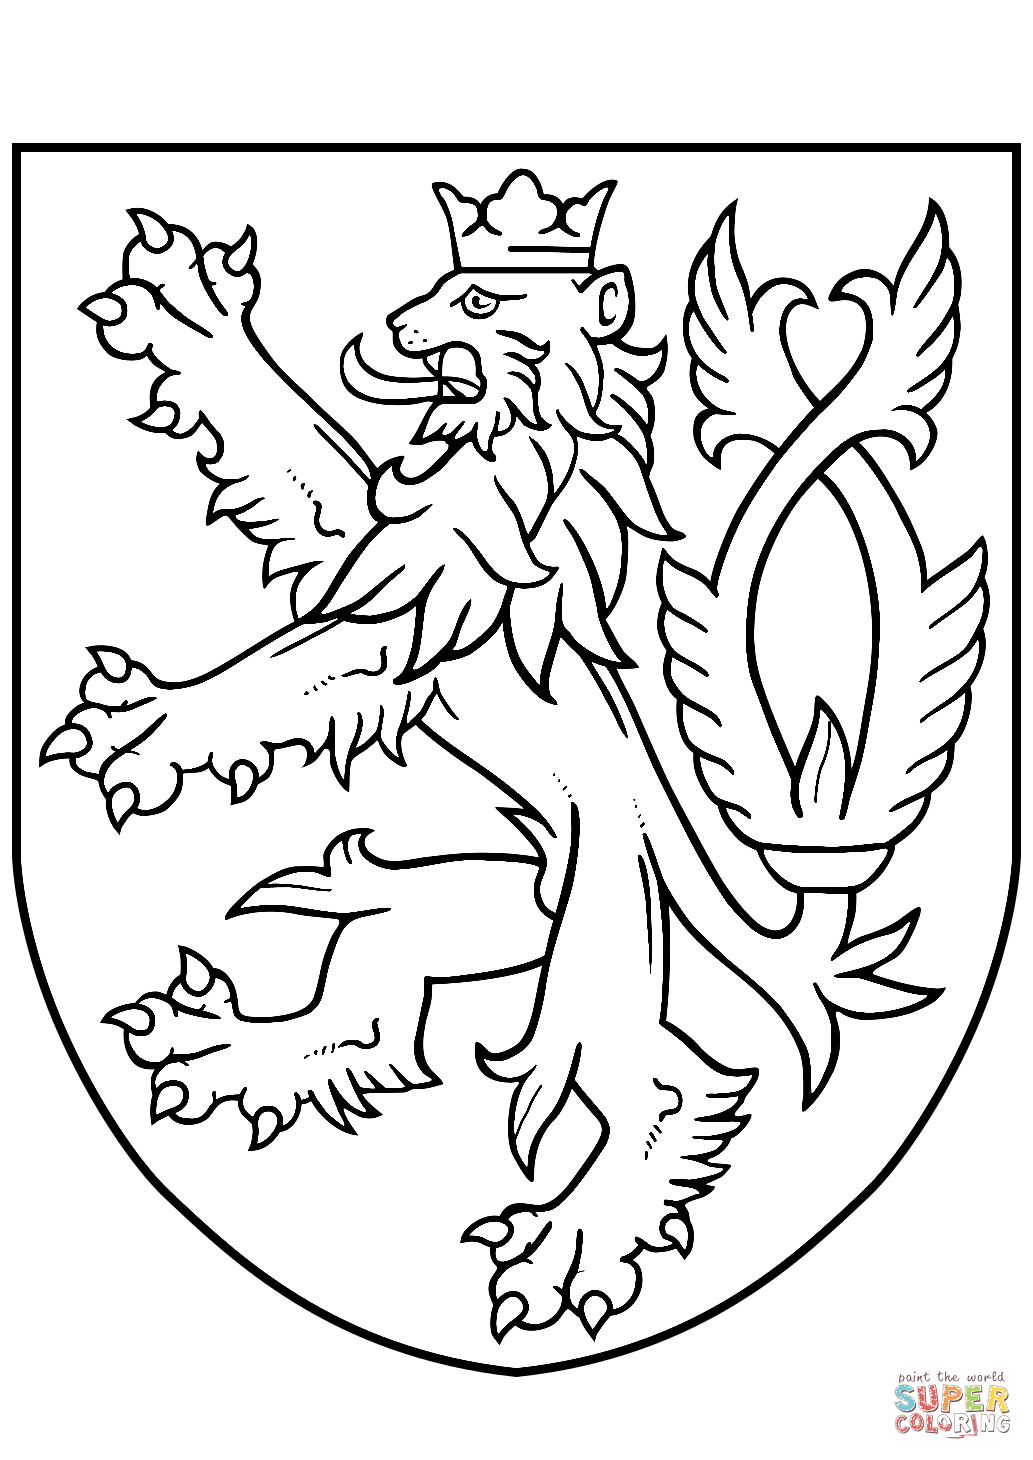 Small coat of arms of the czech republic